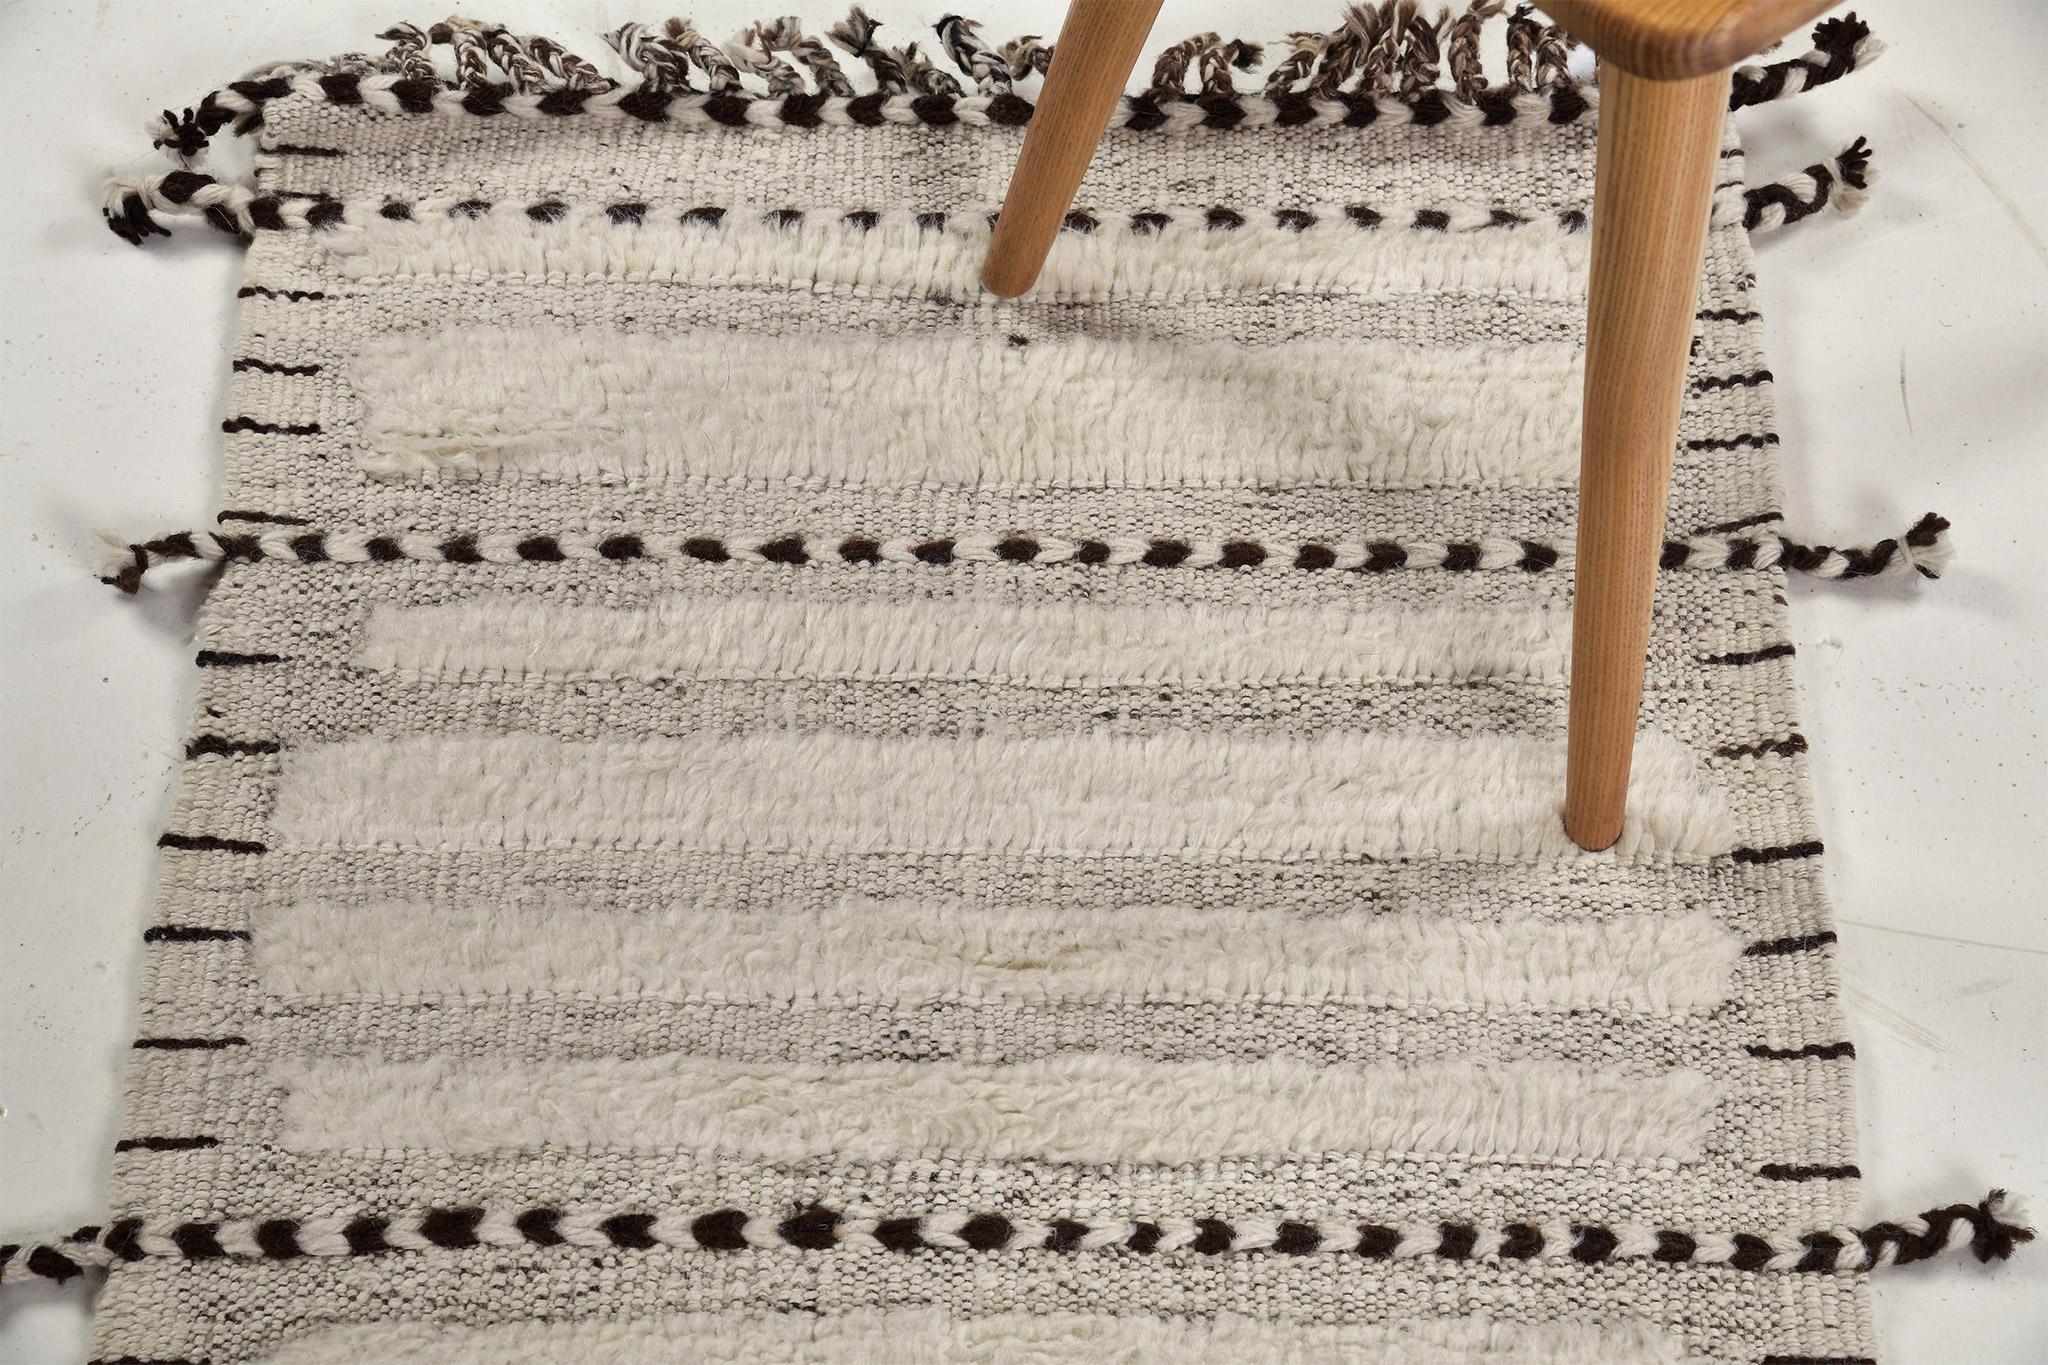 Abrolhos is a handwoven luxurious wool rug with timeless embossed detailing. In addition to its perfect ivory and gray flatweave, Albrohos has a beautiful shag that brings a lustrous texture and contemporary feel to one's space. The Haute Bohemian